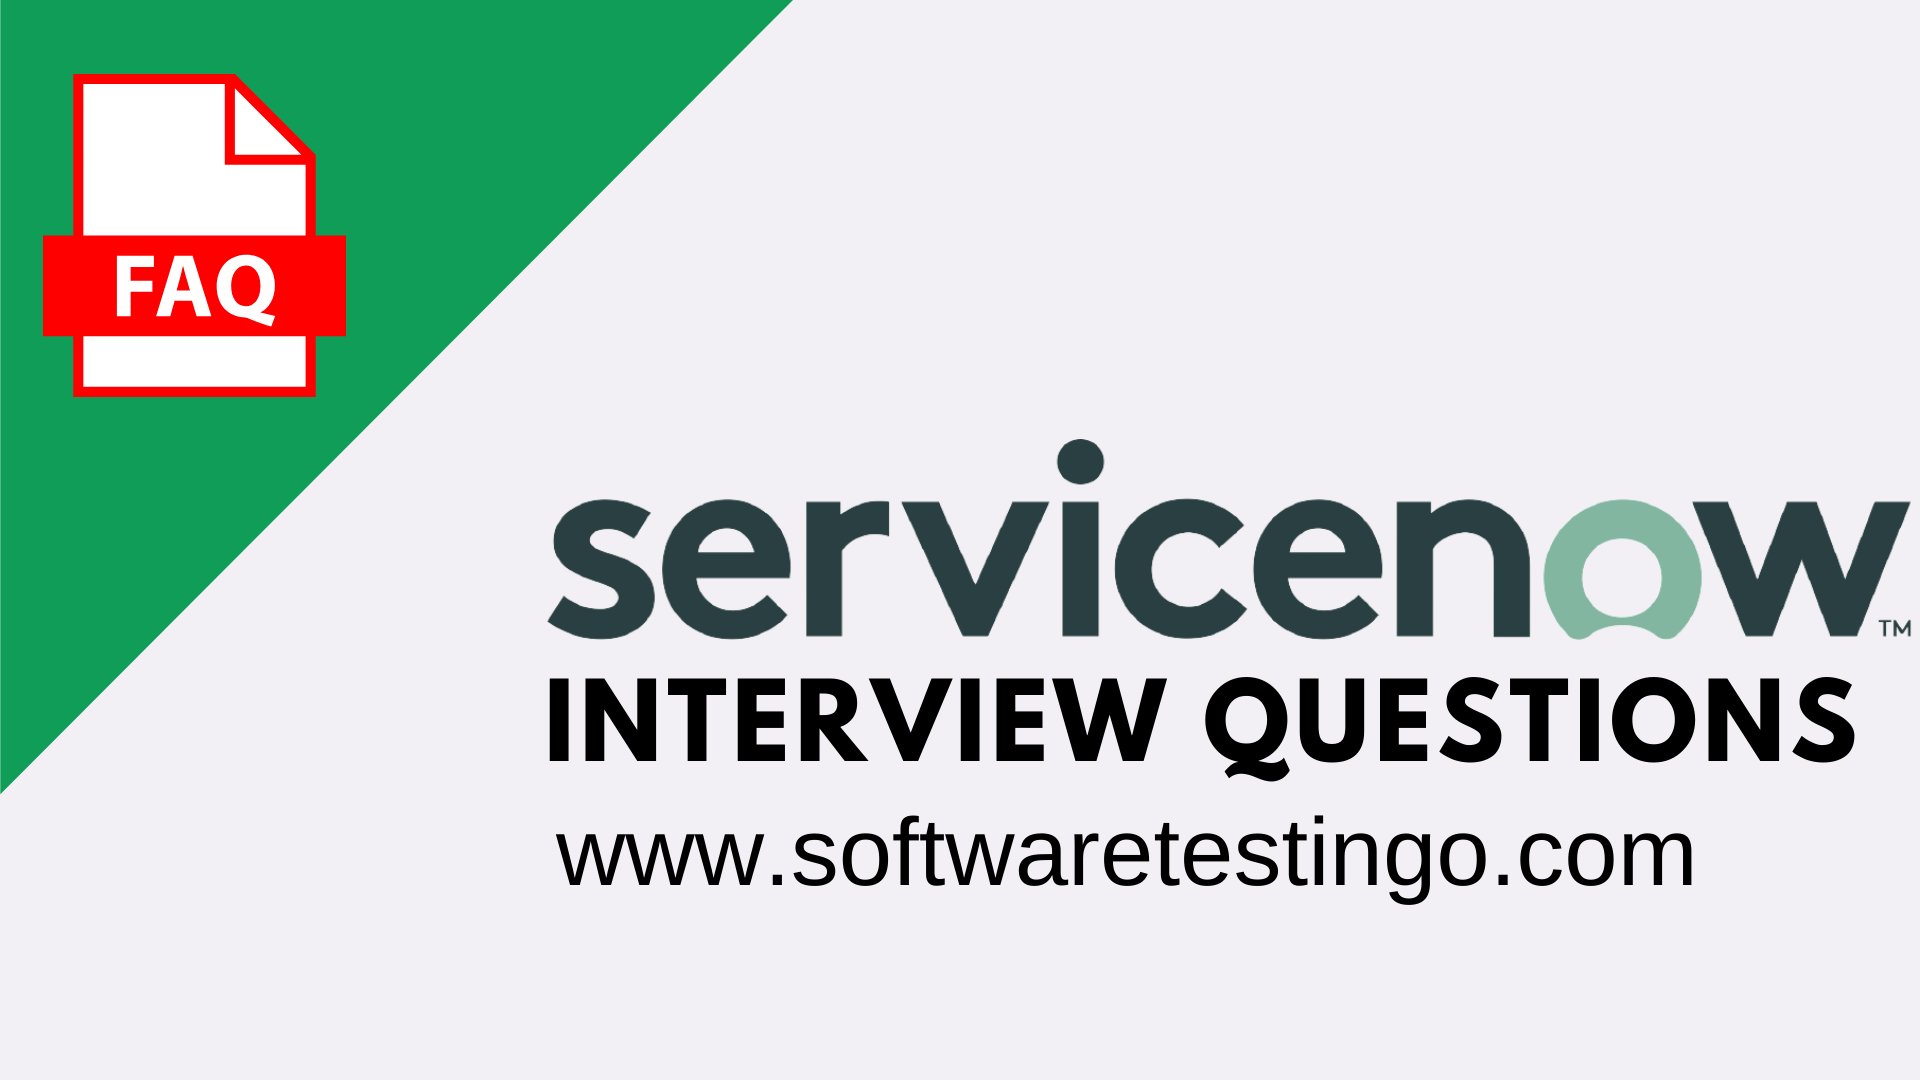 ServiceNow Interview Questions